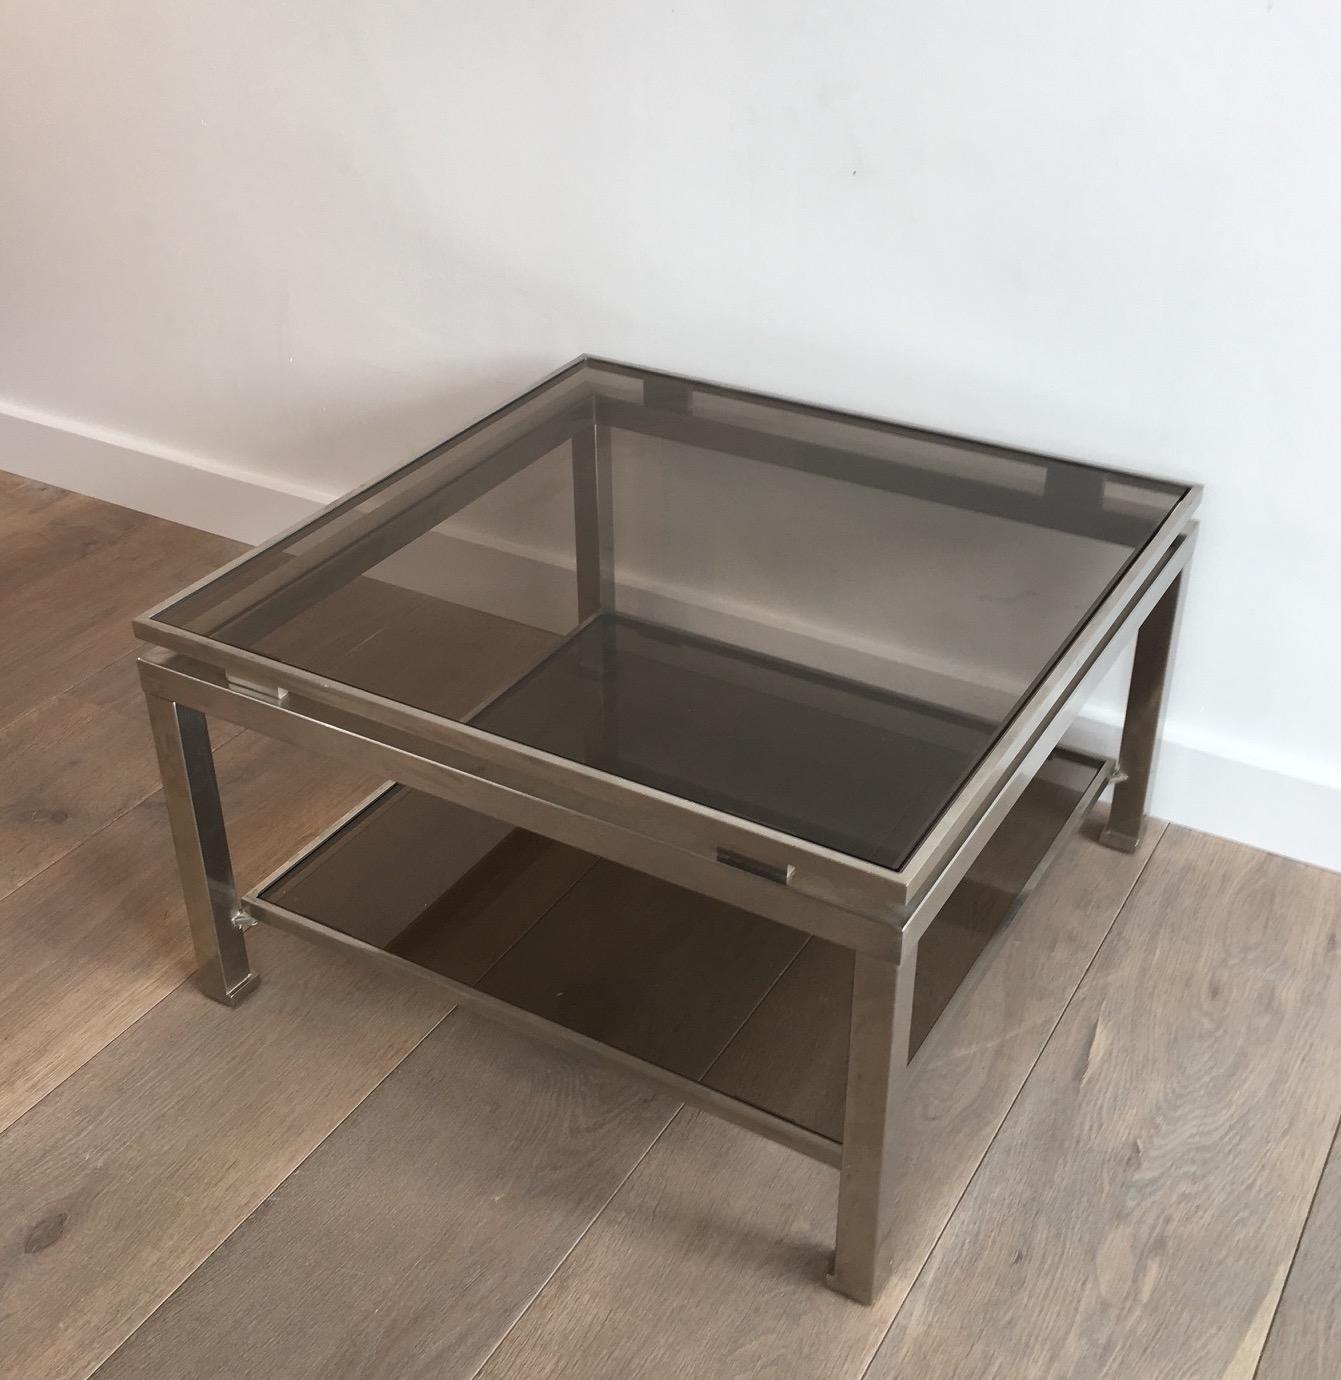 Rare Pair of Brushed Steel Side Tables by Guy Lefèvre for Maison Jansen In Good Condition For Sale In Marcq-en-Barœul, Hauts-de-France